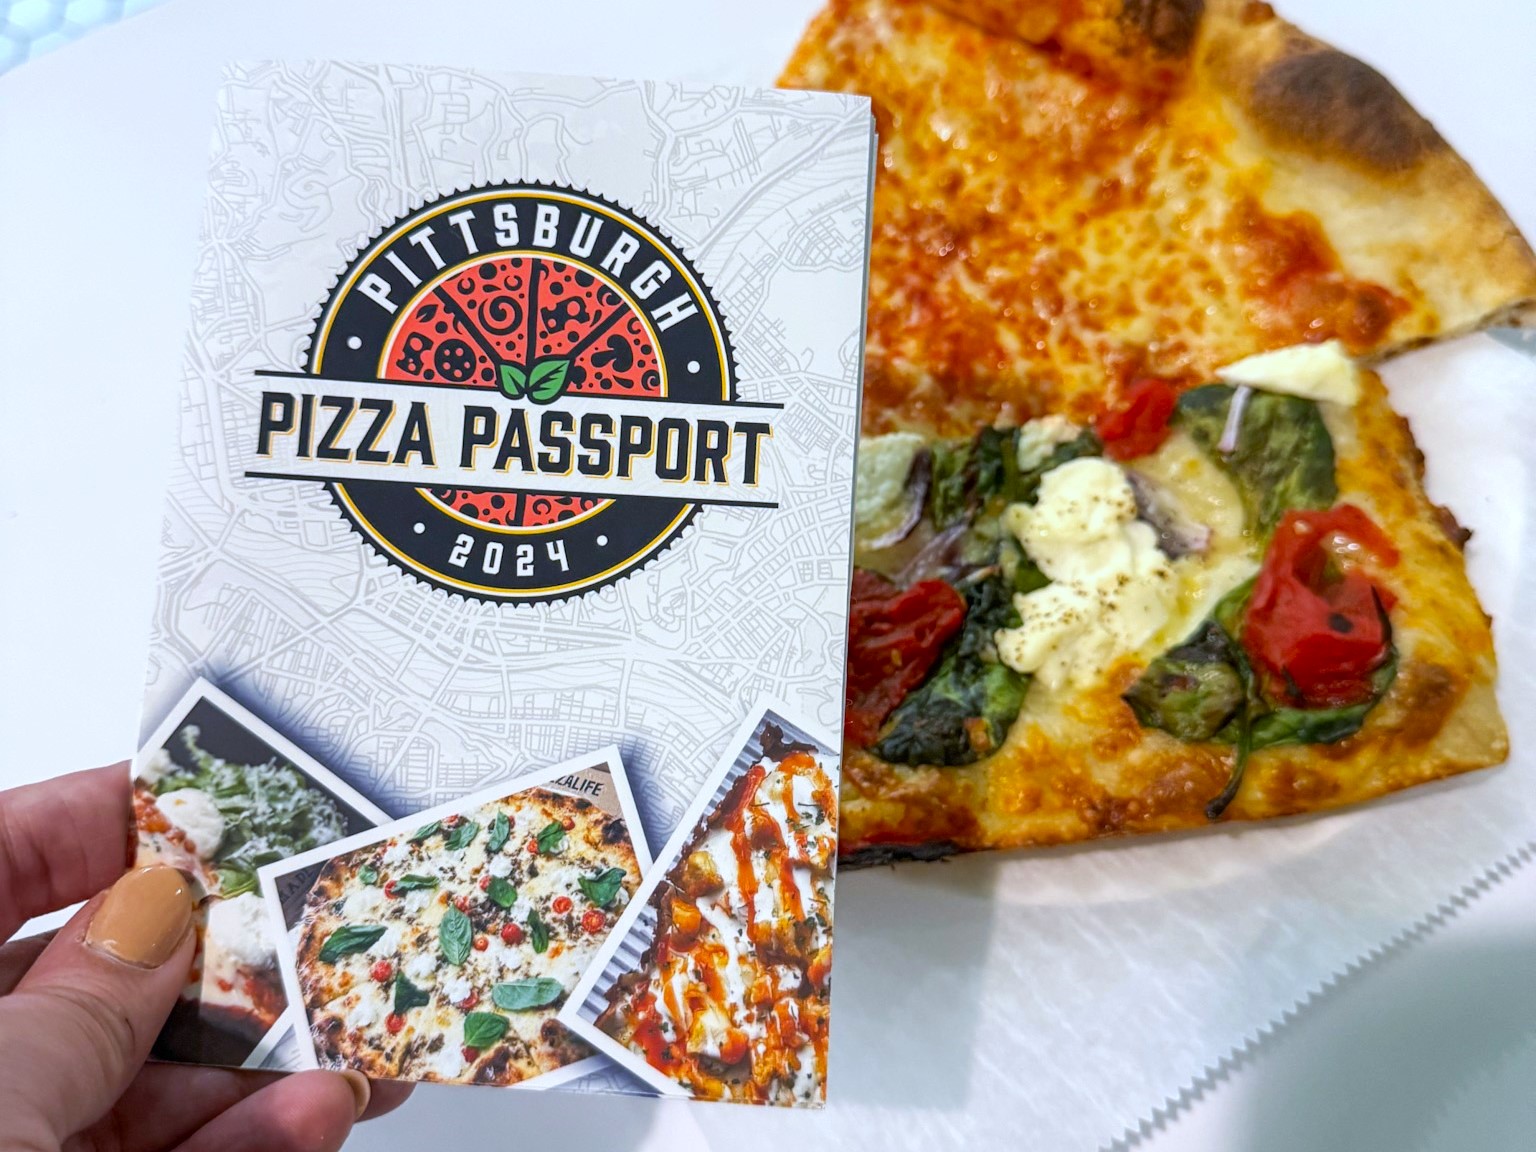 The Pittsburgh Pizza Passport book held up next to two slices of unique pizzas.